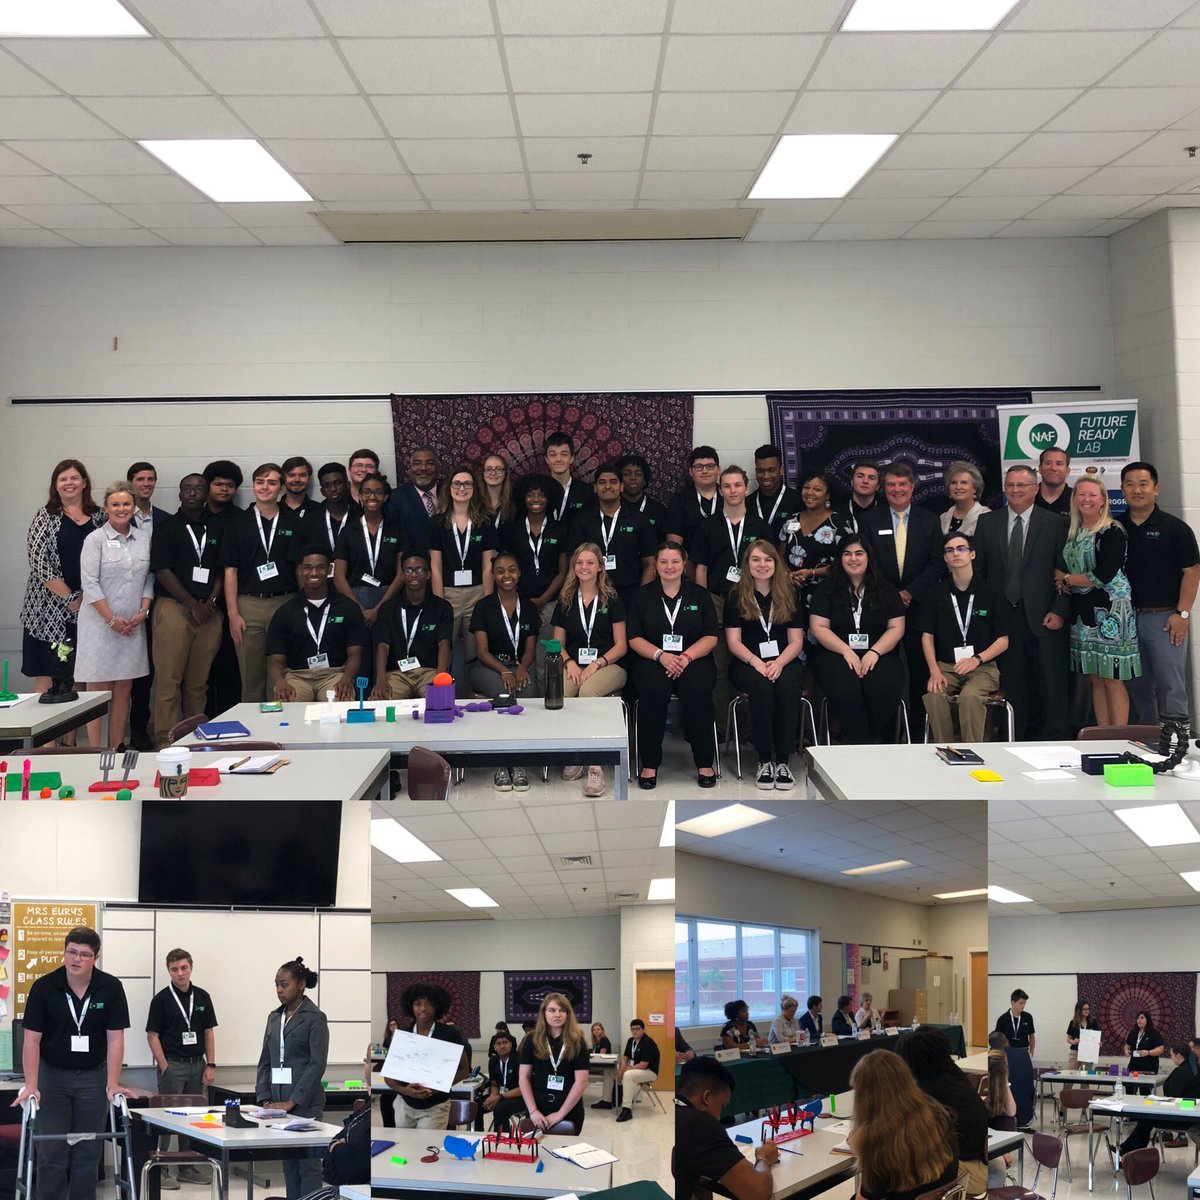 @NAFCareerAcads @CentralinaWDB @CabarrusCTE @RepRichHudson @cabarruschamber @CabarrusEDC Fantastic civic engagement day with the outstanding FRL interns who are developing devices for people with disabilities in the community! Thank You, Cabarrus! #BeFutureReady